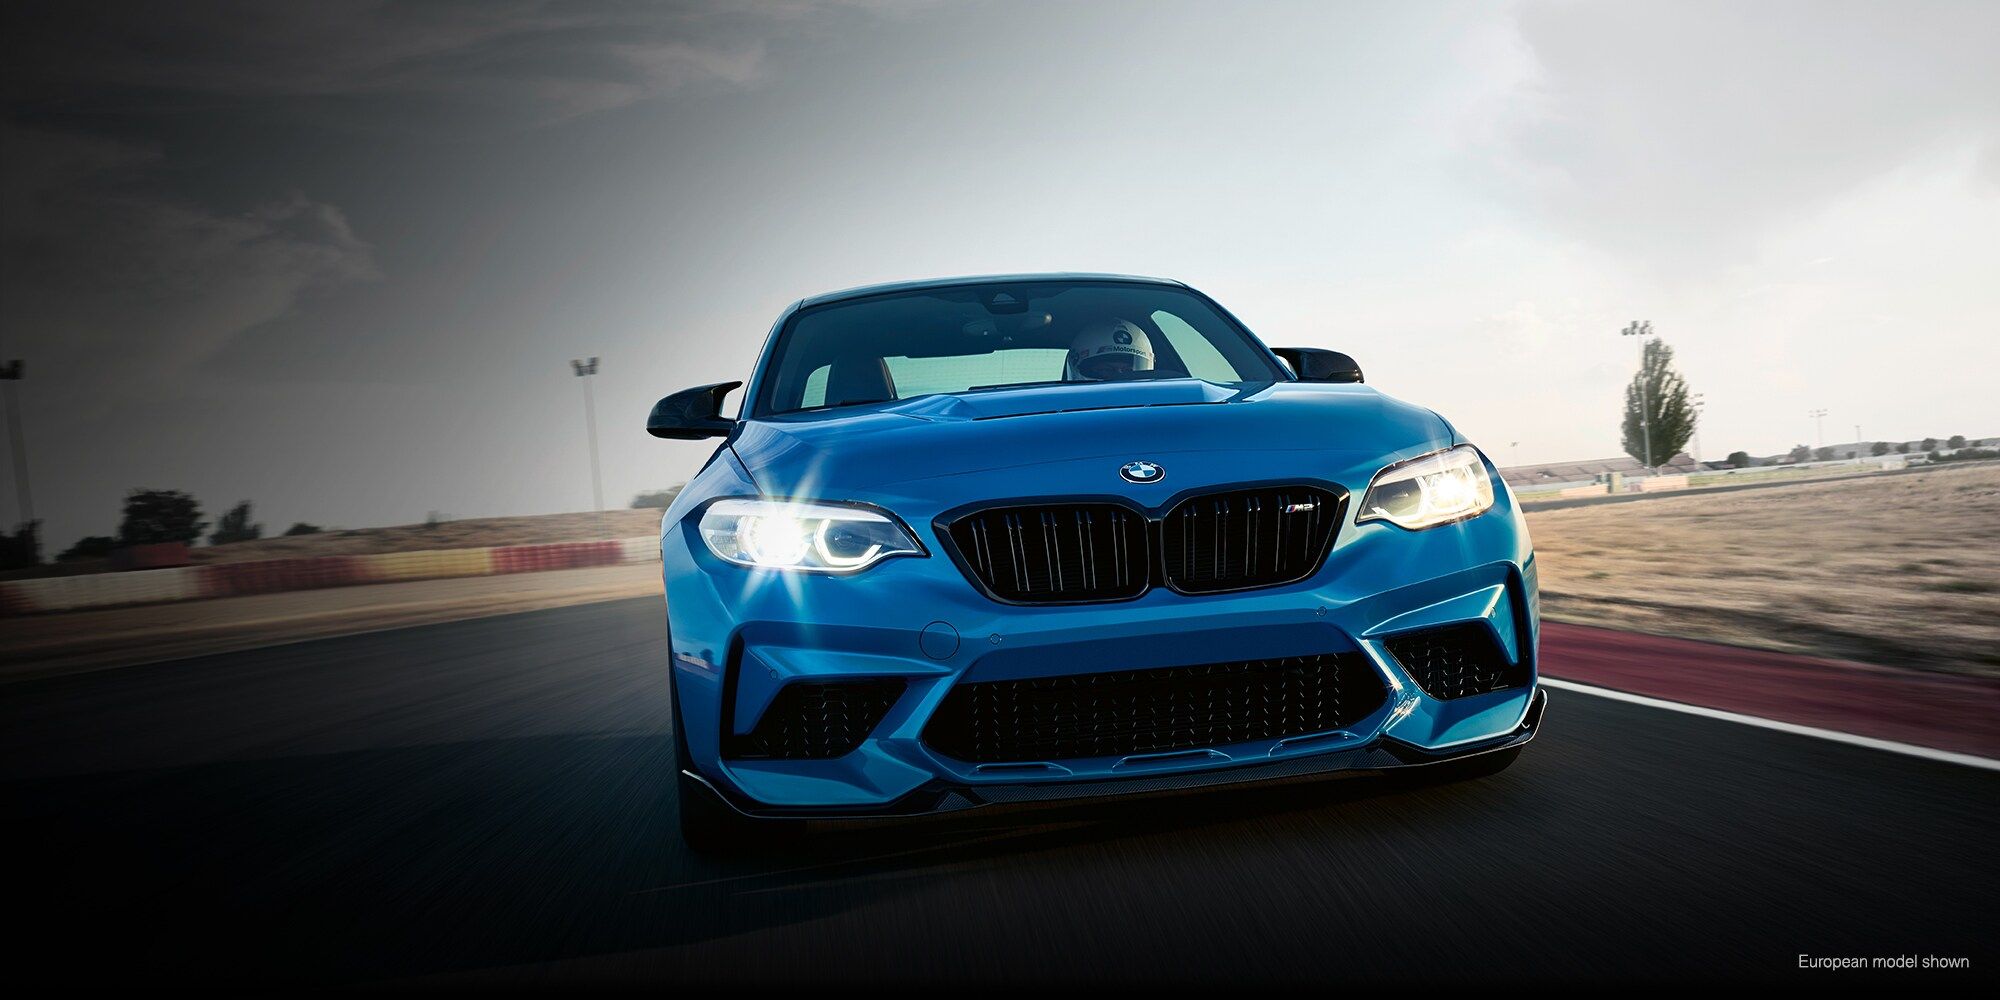 WALLPAPERS: 2020 BMW M2 CS Now!